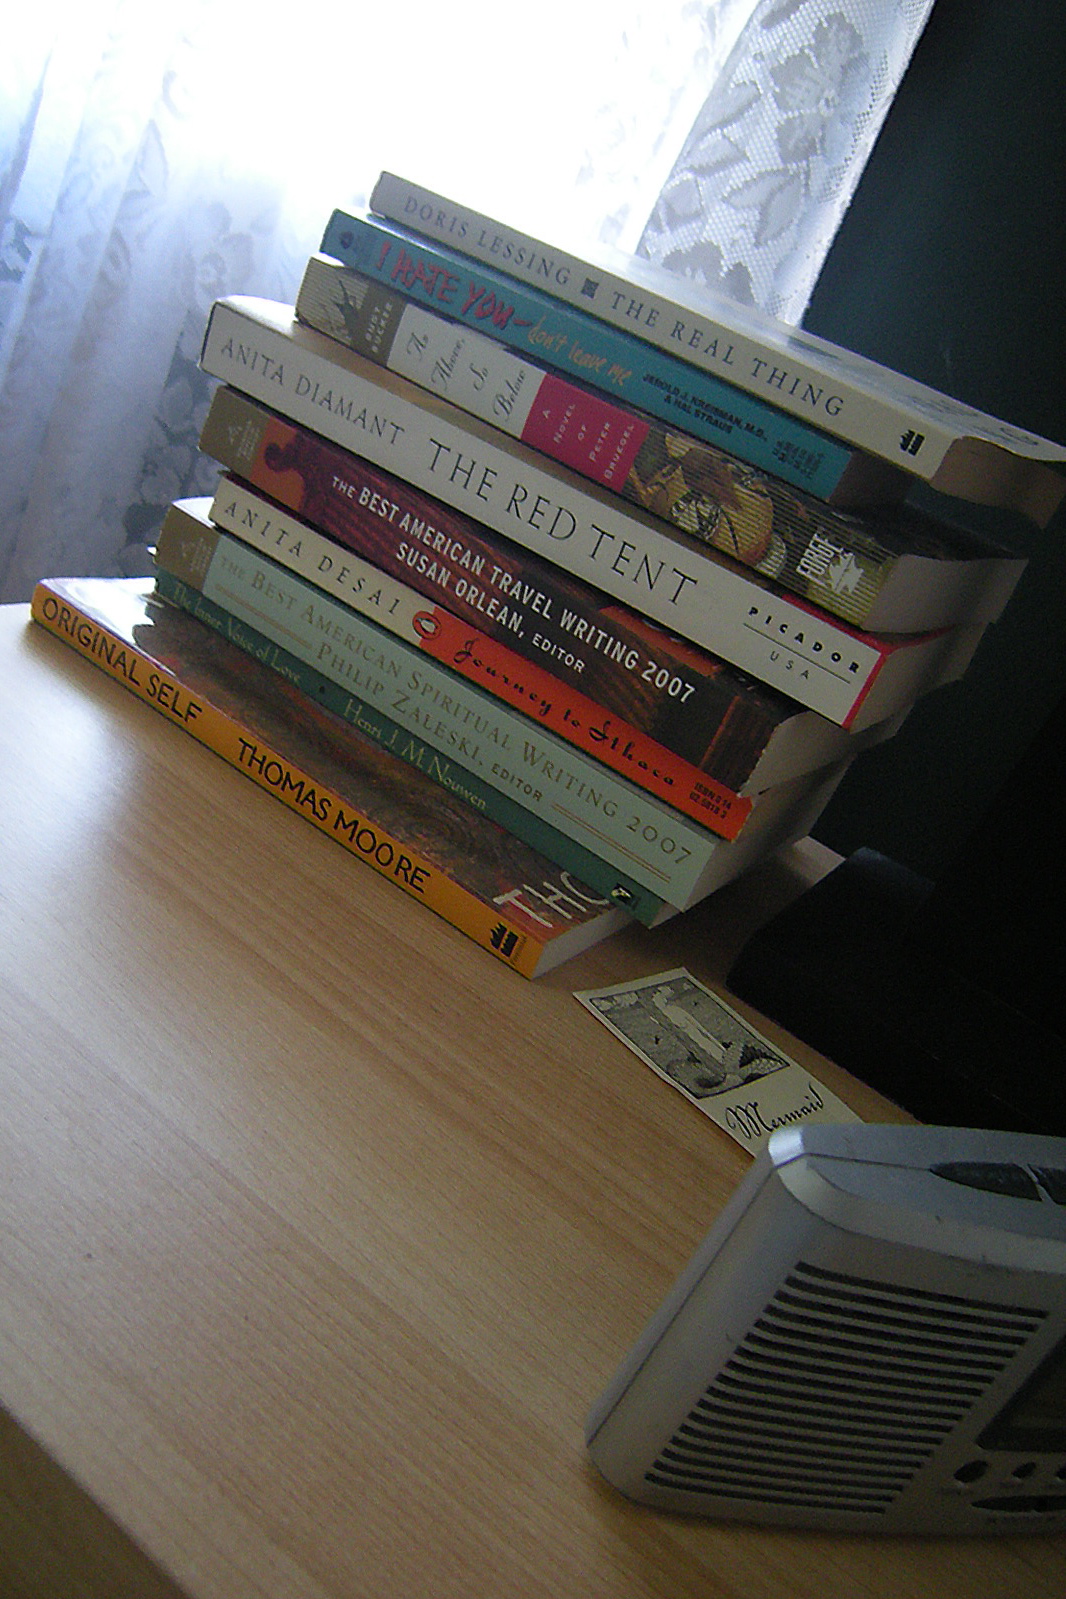 a stack of books on a table next to a small radio